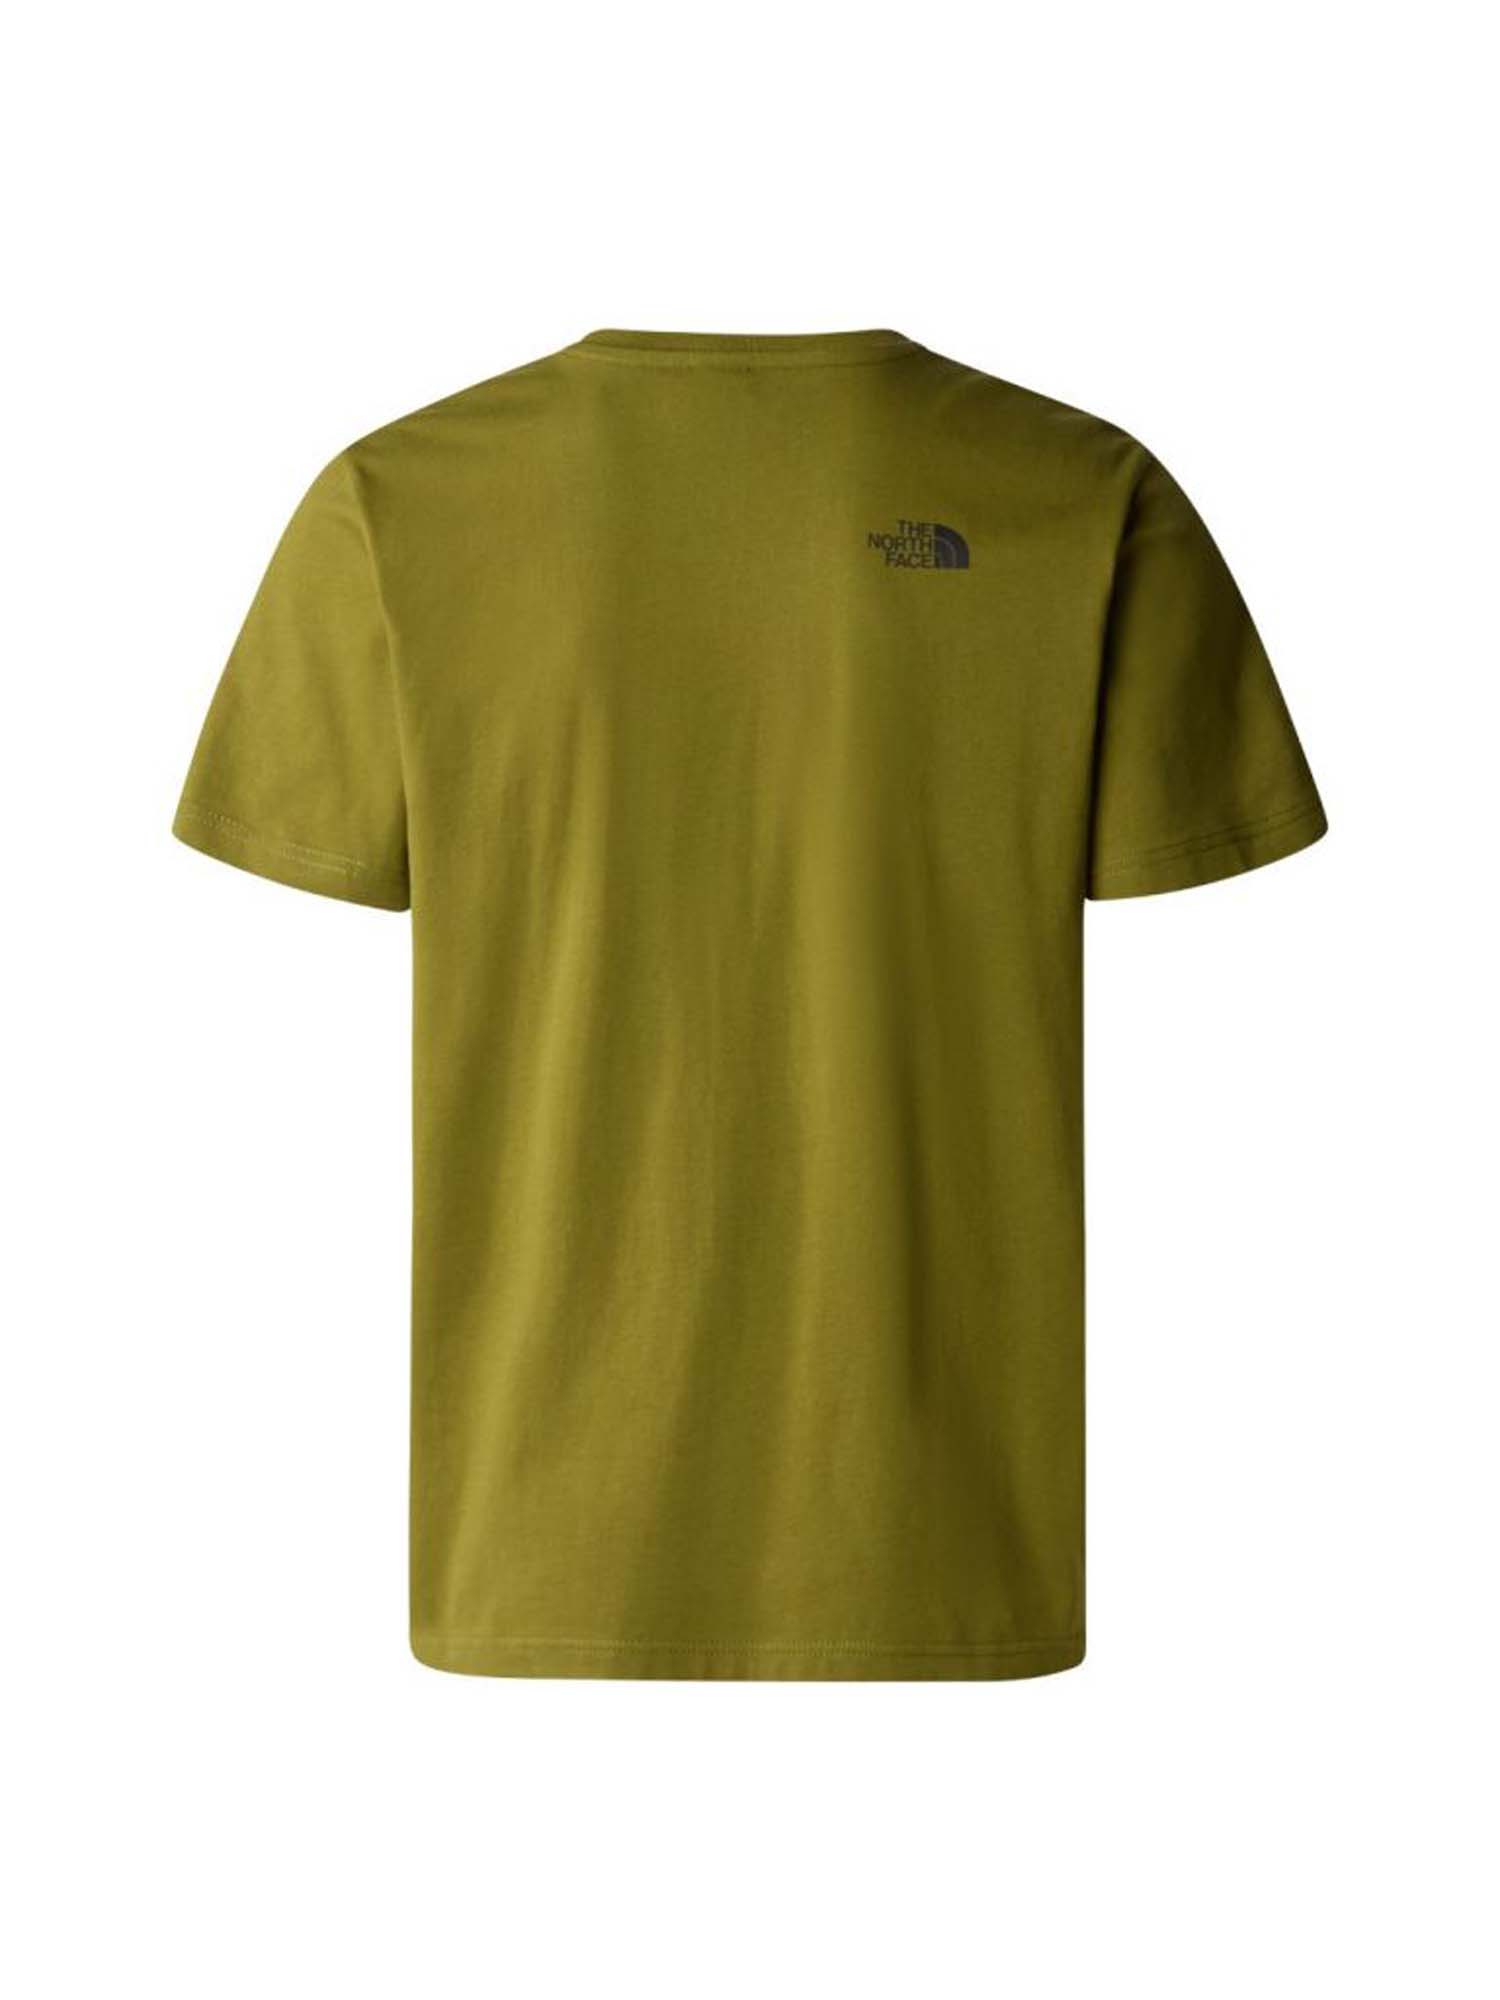 THE NORTH FACE M s/s easy tee